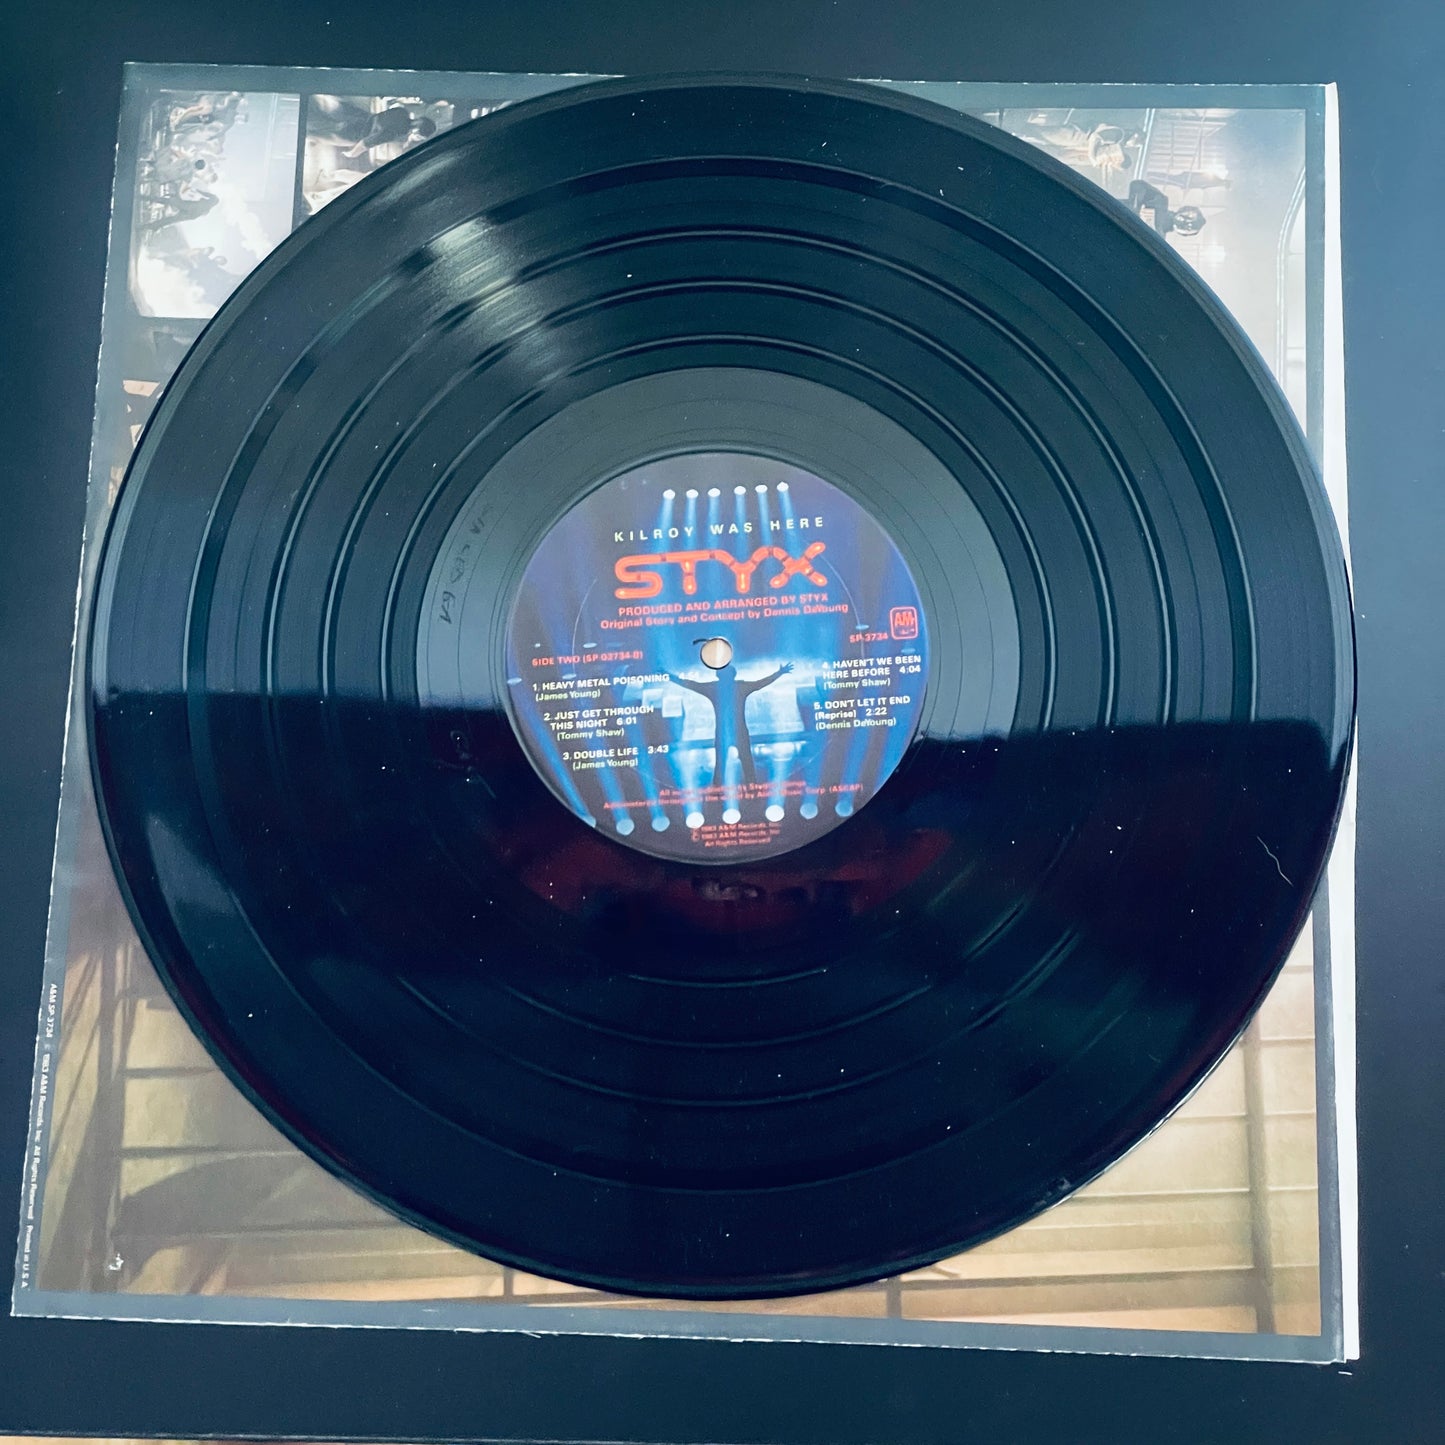 Styx - Kilroy Was Here LP (used)